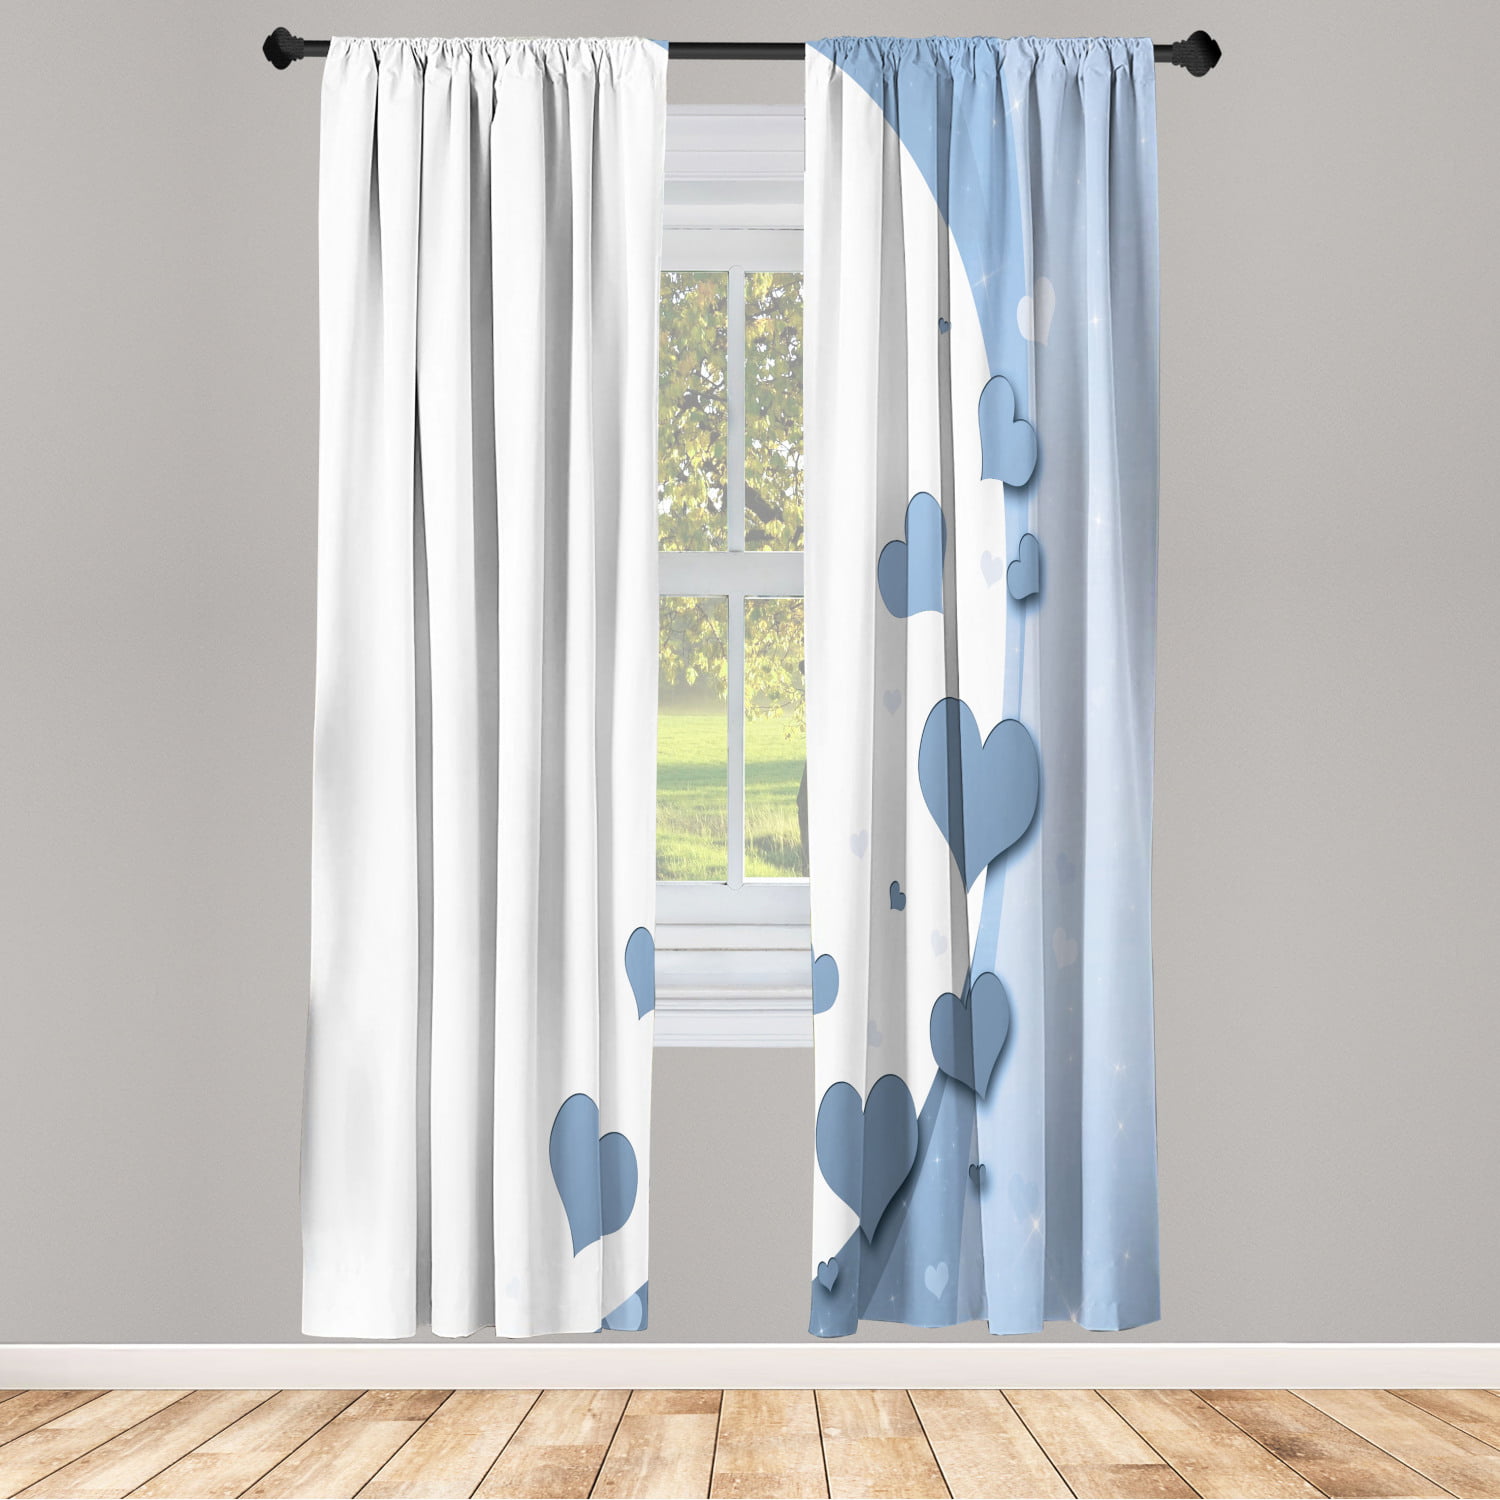 Love Window Curtains, Valentines Day Romance Art with Hearts Stars Wedding  Happiness Theme, Lightweight Decorative Panels Set of 2 and Rod Pocket, 56